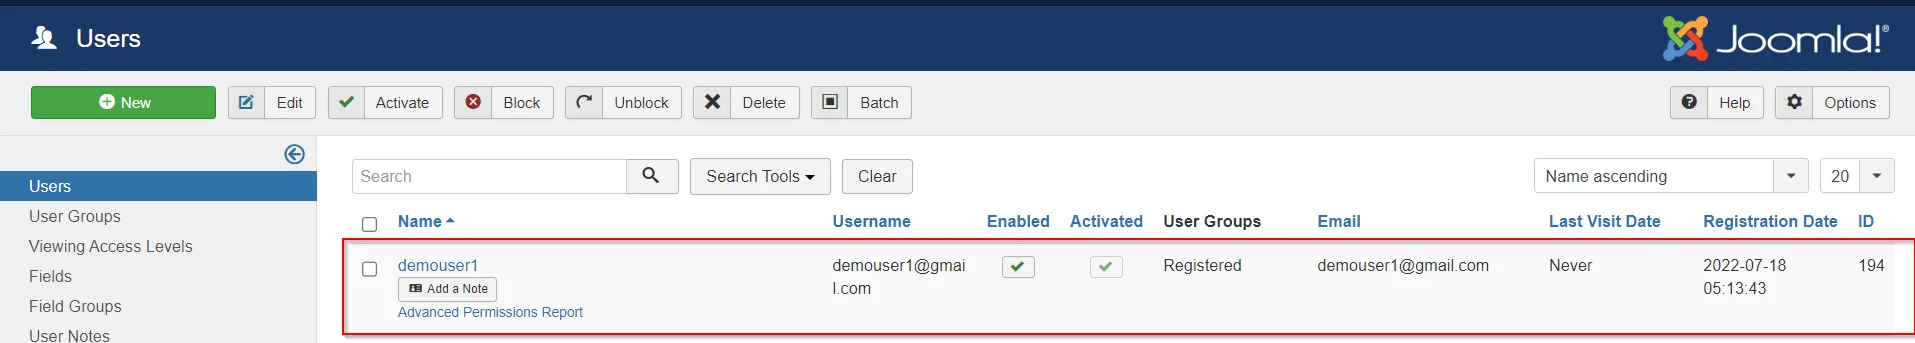 Drupal User Provisioning and Sync - you can check and verify the user has been created in joomla scim server application